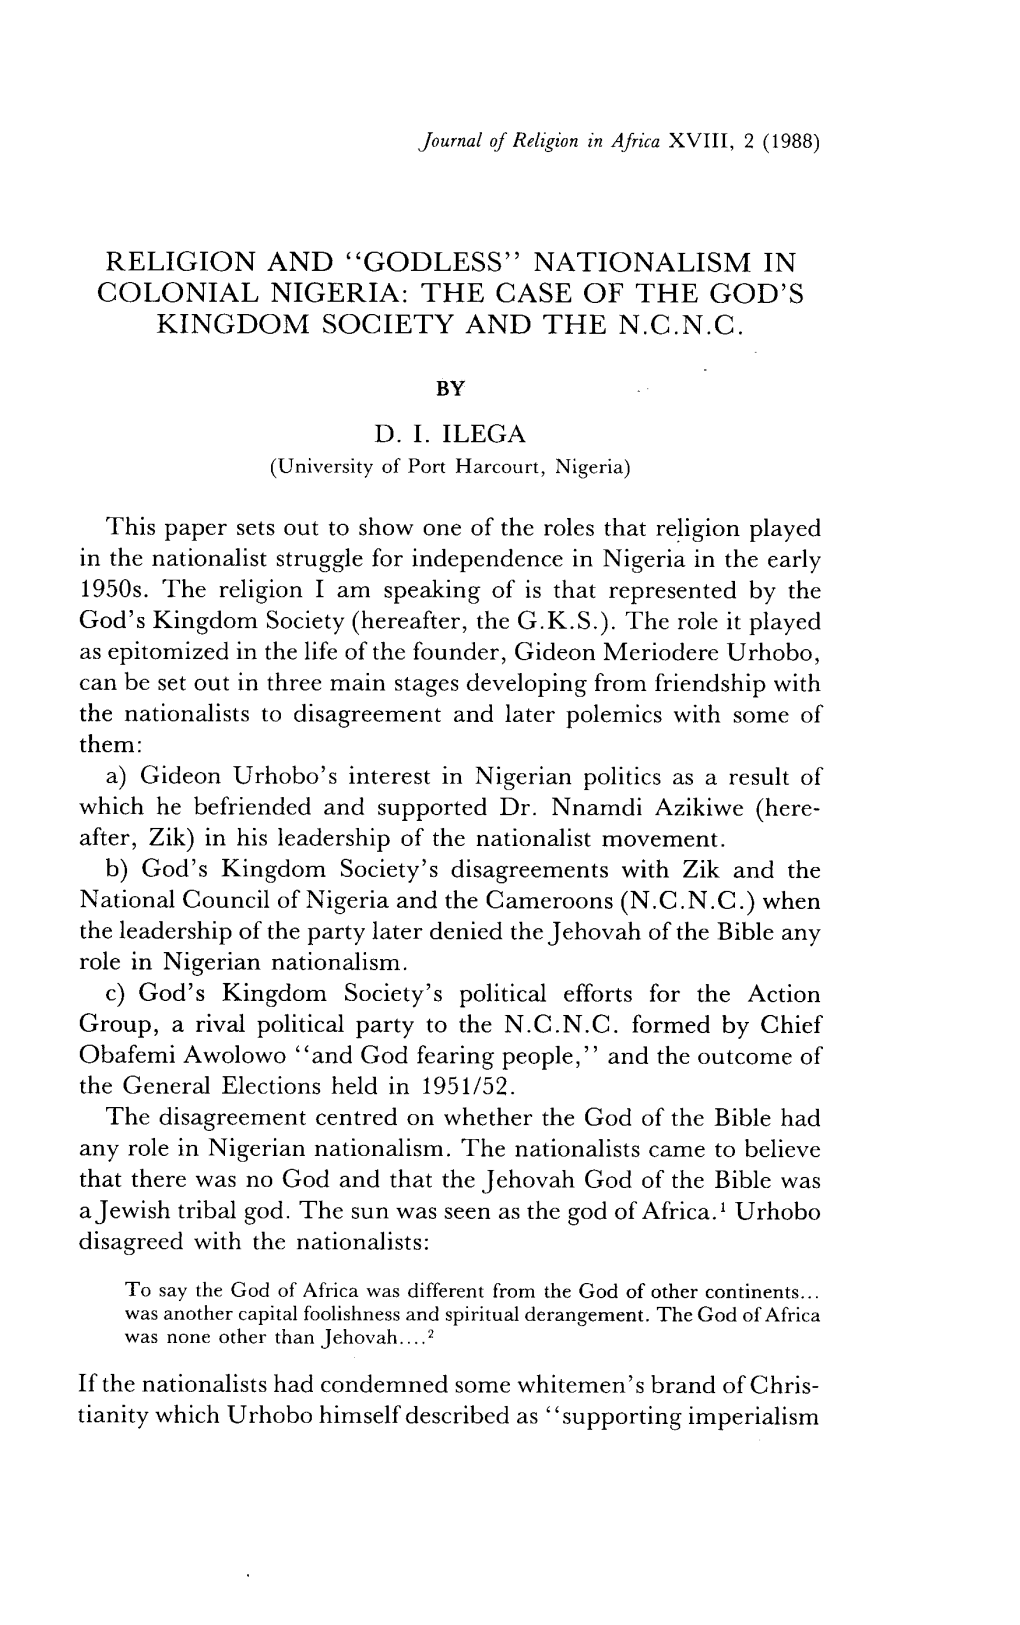 Nationalism in Colonial Nigeria: the Case of the God's Kingdom Society and the N.C.N.C